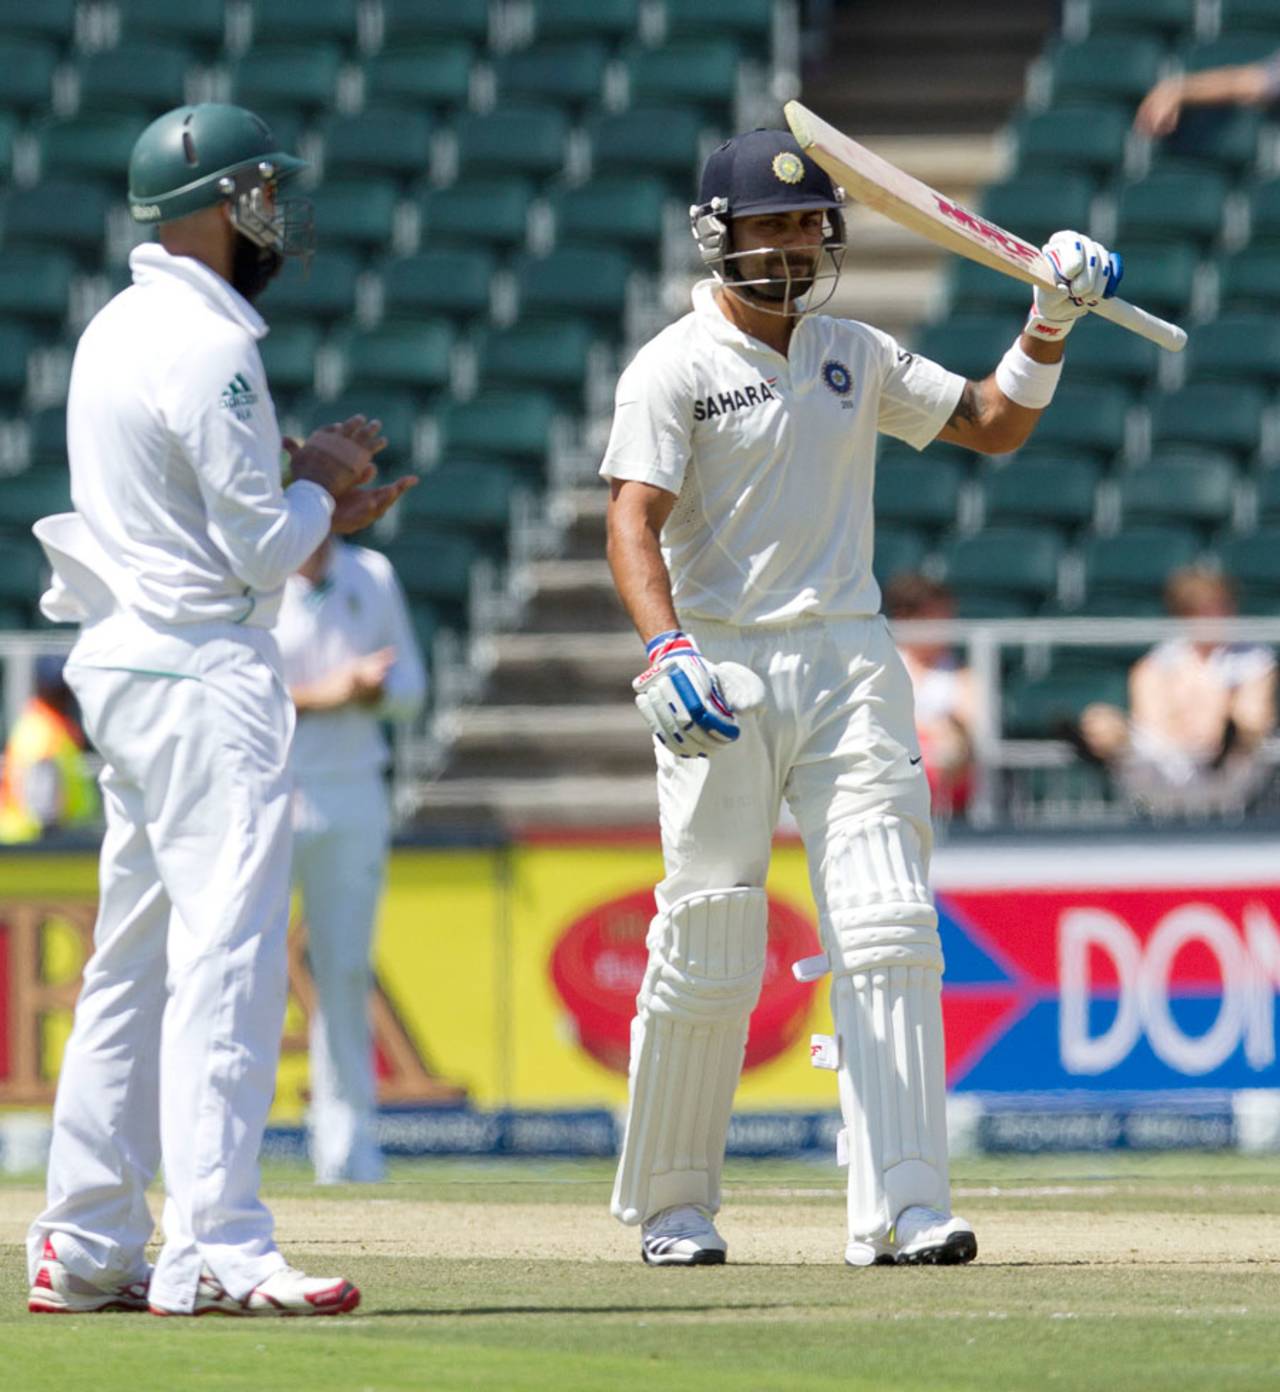 Virat Kohli acknowledges the applause after hitting a maiden Test fifty in South Africa, South Africa v India, 1st Test, Johannesburg, 1st day, December 18, 2013